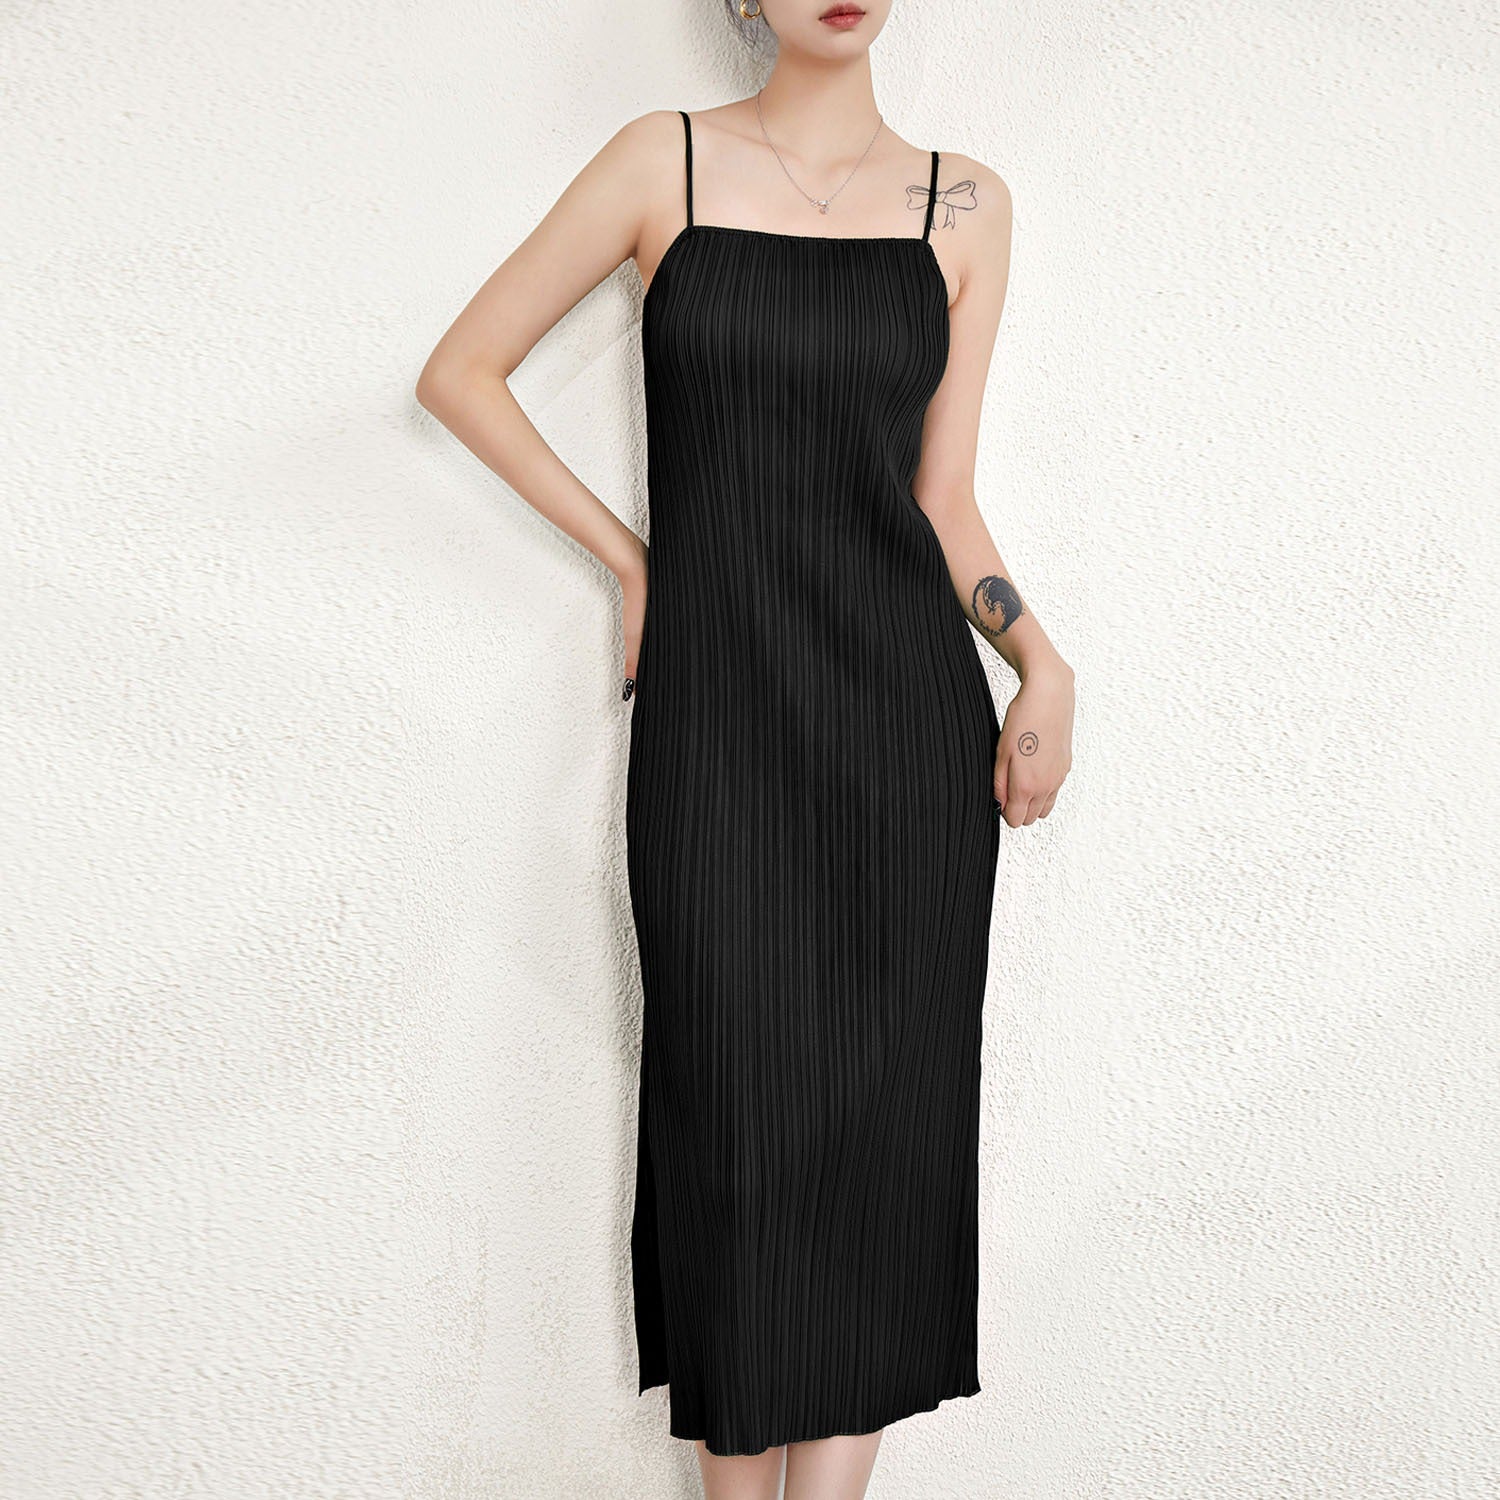 Folded camisole dress for women with a straight neckline slim fit and slim fit slit midi length skirt